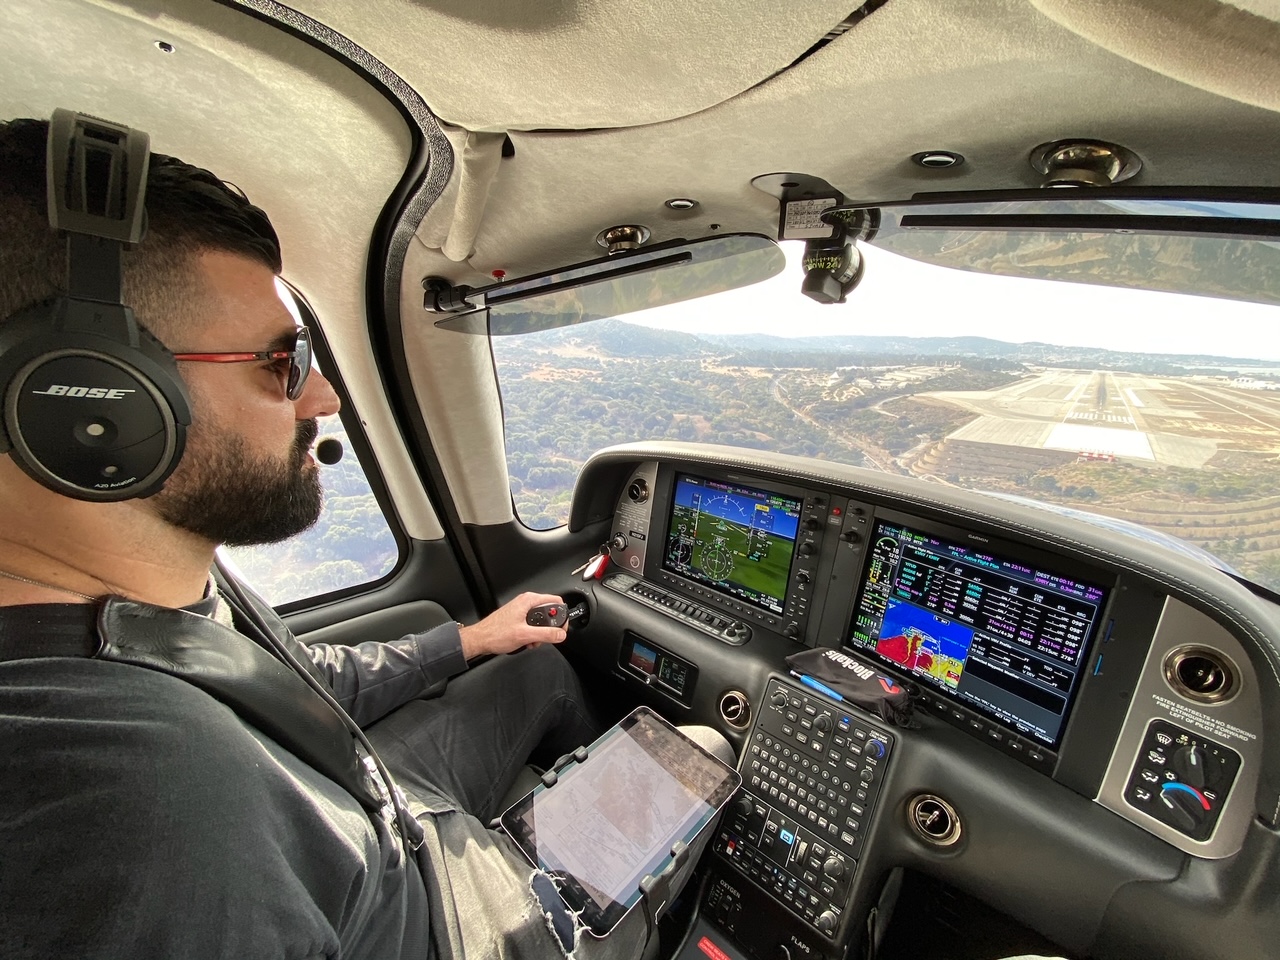 Flight Training Frequently Asked Questions